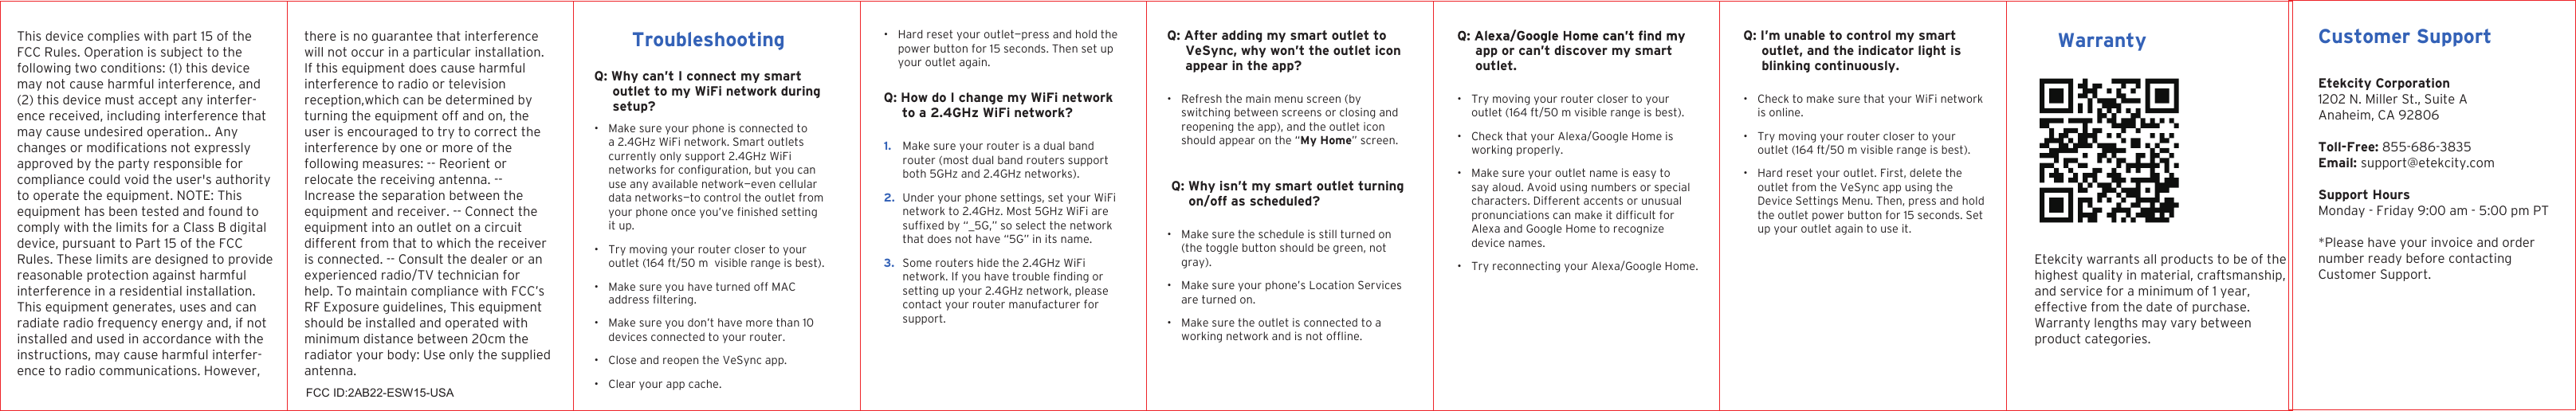 WarrantyTroubleshootingQ: Why can’t I connect my smart outlet to my WiFi network during setup?• Make sure your phone is connected to a 2.4GHz WiFi network. Smart outlets currently only support 2.4GHz WiFi use any available network—even cellular data networks—to control the outlet from it up.• Try moving your router closer to your outlet (164 ft/50 m  visible range is best).• Make sure you have turned off MAC • Make sure you don’t have more than 10 devices connected to your router.• Close and reopen the VeSync app.• Clear your app cache. • Hard reset your outlet—press and hold the power button for 15 seconds. Then set up your outlet again.Q: How do I change my WiFi network to a 2.4GHz WiFi network?1. Make sure your router is a dual band router (most dual band routers support both 5GHz and 2.4GHz networks).2. Under your phone settings, set your WiFi network to 2.4GHz. Most 5GHz WiFi are that does not have “5G” in its name.3. Some routers hide the 2.4GHz WiFi setting up your 2.4GHz network, please contact your router manufacturer for support.suffixed by “_5G,” so select the networknetwork. If you have trouble finding orQ: After adding my smart outlet to VeSync, why won’t the outlet icon appear in the app?app or can’t discover my smart outlet.Q: I’m unable to control my smart outlet, and the indicator light is blinking continuously.Q: Why isn’t my smart outlet turning on/off as scheduled?• Refresh the main menu screen (by switching between screens or closing and reopening the app), and the outlet icon should appear on the “My Home” screen.• Try moving your router closer to your outlet (164 ft/50 m visible range is best).• Check that your Alexa/Google Home is working properly.• Make sure your outlet name is easy to say aloud. Avoid using numbers or special characters. Different accents or unusual Alexa and Google Home to recognize device names.• Try reconnecting your Alexa/Google Home.• Check to make sure that your WiFi network is online.• Try moving your router closer to your outlet (164 ft/50 m visible range is best).• Hard reset your outlet. First, delete the outlet from the VeSync app using the Device Settings Menu. Then, press and hold the outlet power button for 15 seconds. Set up your outlet again to use it.• Make sure the schedule is still turned on (the toggle button should be green, not gray).• Make sure your phone’s Location Services are turned on.• Make sure the outlet is connected to a working network and is not offline.pronunciations can make it difficult fornetworks for configuration, but you canaddress filtering.your phone once you’ve finished settingCustomer SupportEtekcity Corporation1202 N. Miller St., Suite AAnaheim, CA 92806Toll-Free: 855-686-3835 Email: support@etekcity.comSupport Hours Monday - Friday 9:00 am - 5:00 pm PT*Please have your invoice and ordernumber ready before contactingCustomer Support.Etekcity warrants all products to be of the highest quality in material, craftsmanship, and service for a minimum of 1 year, effective from the date of purchase. Warranty lengths may vary between product categories.This device complies with part 15 of the FCC Rules. Operation is subject to the following two conditions: (1) this device may not cause harmful interference, and (2) this device must accept any interfer-ence received, including interference thatmay cause undesired operation.. Anychanges or modifications not expresslyapproved by the party responsible forcompliance could void the user&apos;s authorityto operate the equipment. NOTE: Thisequipment has been tested and found tocomply with the limits for a Class B digitaldevice, pursuant to Part 15 of the FCCRules. These limits are designed to providereasonable protection against harmfulinterference in a residential installation.This equipment generates, uses and canradiate radio frequency energy and, if notinstalled and used in accordance with theinstructions, may cause harmful interfer-ence to radio communications. However,there is no guarantee that interference will not occur in a particular installation. If this equipment does cause harmful interference to radio or television reception,which can be determined by turning the equipment off and on, the user is encouraged to try to correct the interference by one or more of the following measures: -- Reorient or relocate the receiving antenna. -- Increase the separation between the equipment and receiver. -- Connect the equipment into an outlet on a circuit different from that to which the receiver is connected. -- Consult the dealer or an experienced radio/TV technician for help. To maintain compliance with FCC’s RF Exposure guidelines, This equipment should be installed and operated with minimum distance between 20cm the radiator your body: Use only the supplied antenna.FCC ID:2AB22-ESW15-USA